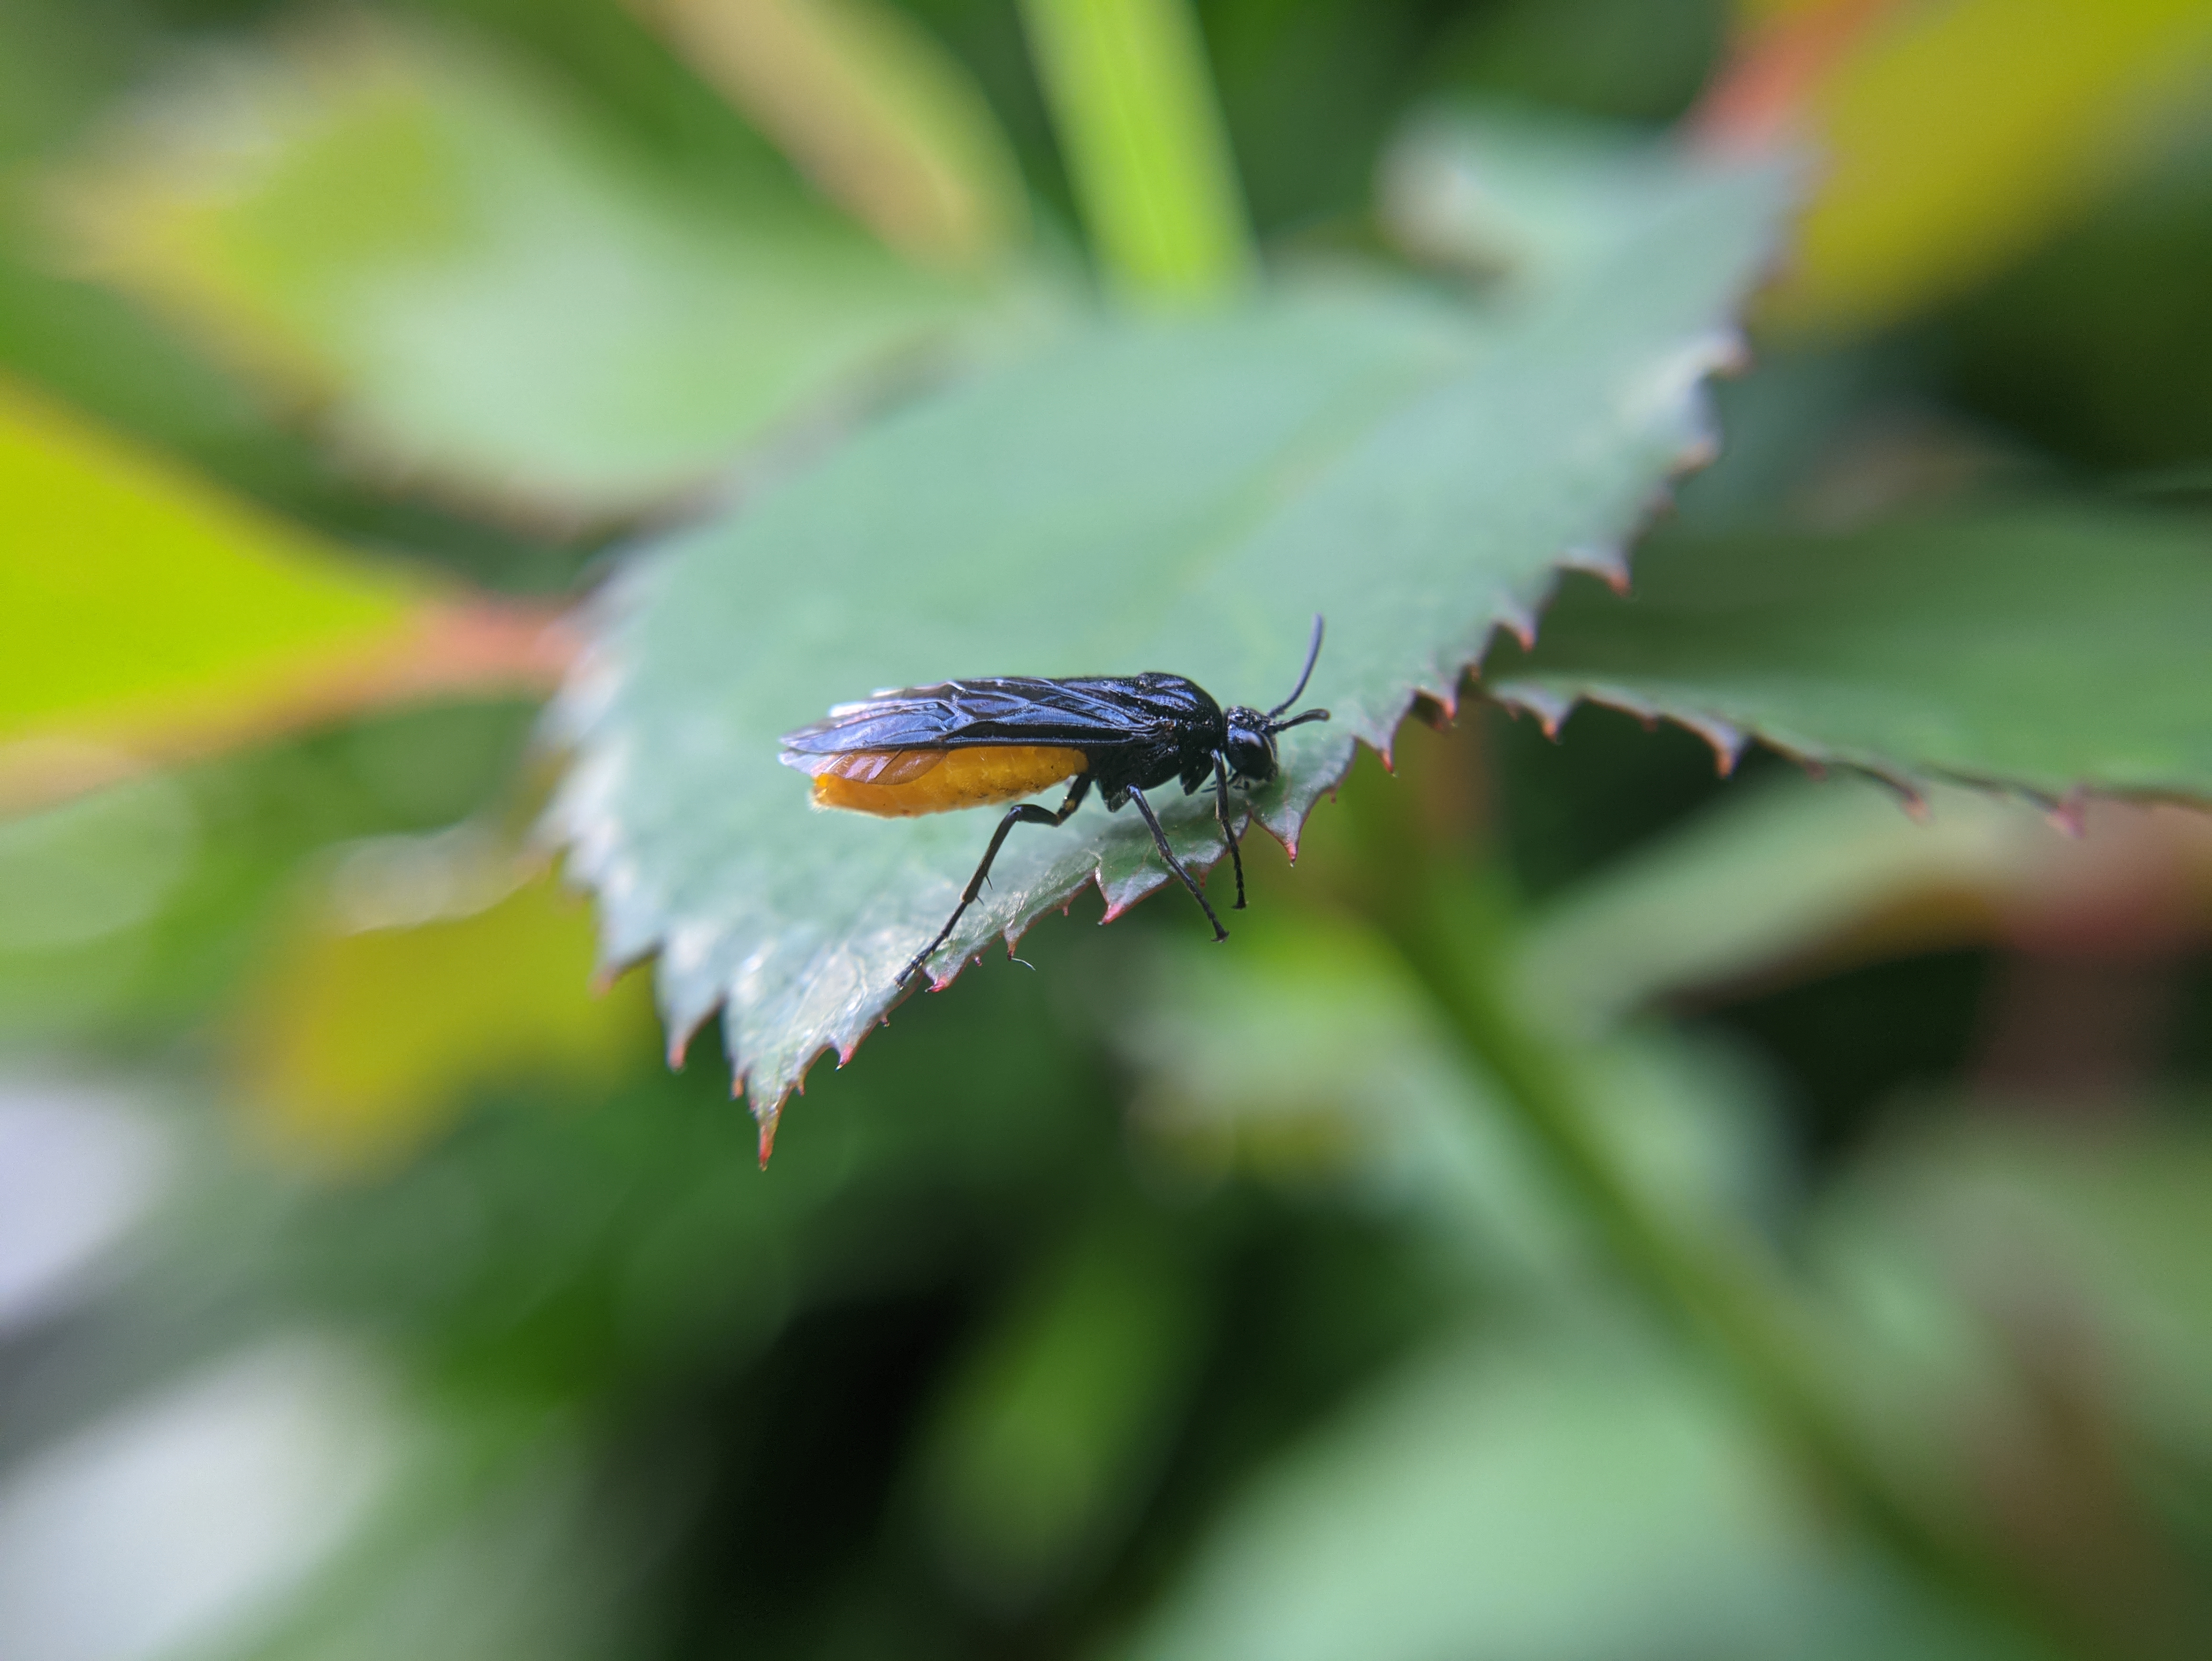 Insect Macro Leaves Blurry Background Photography 4656x3496